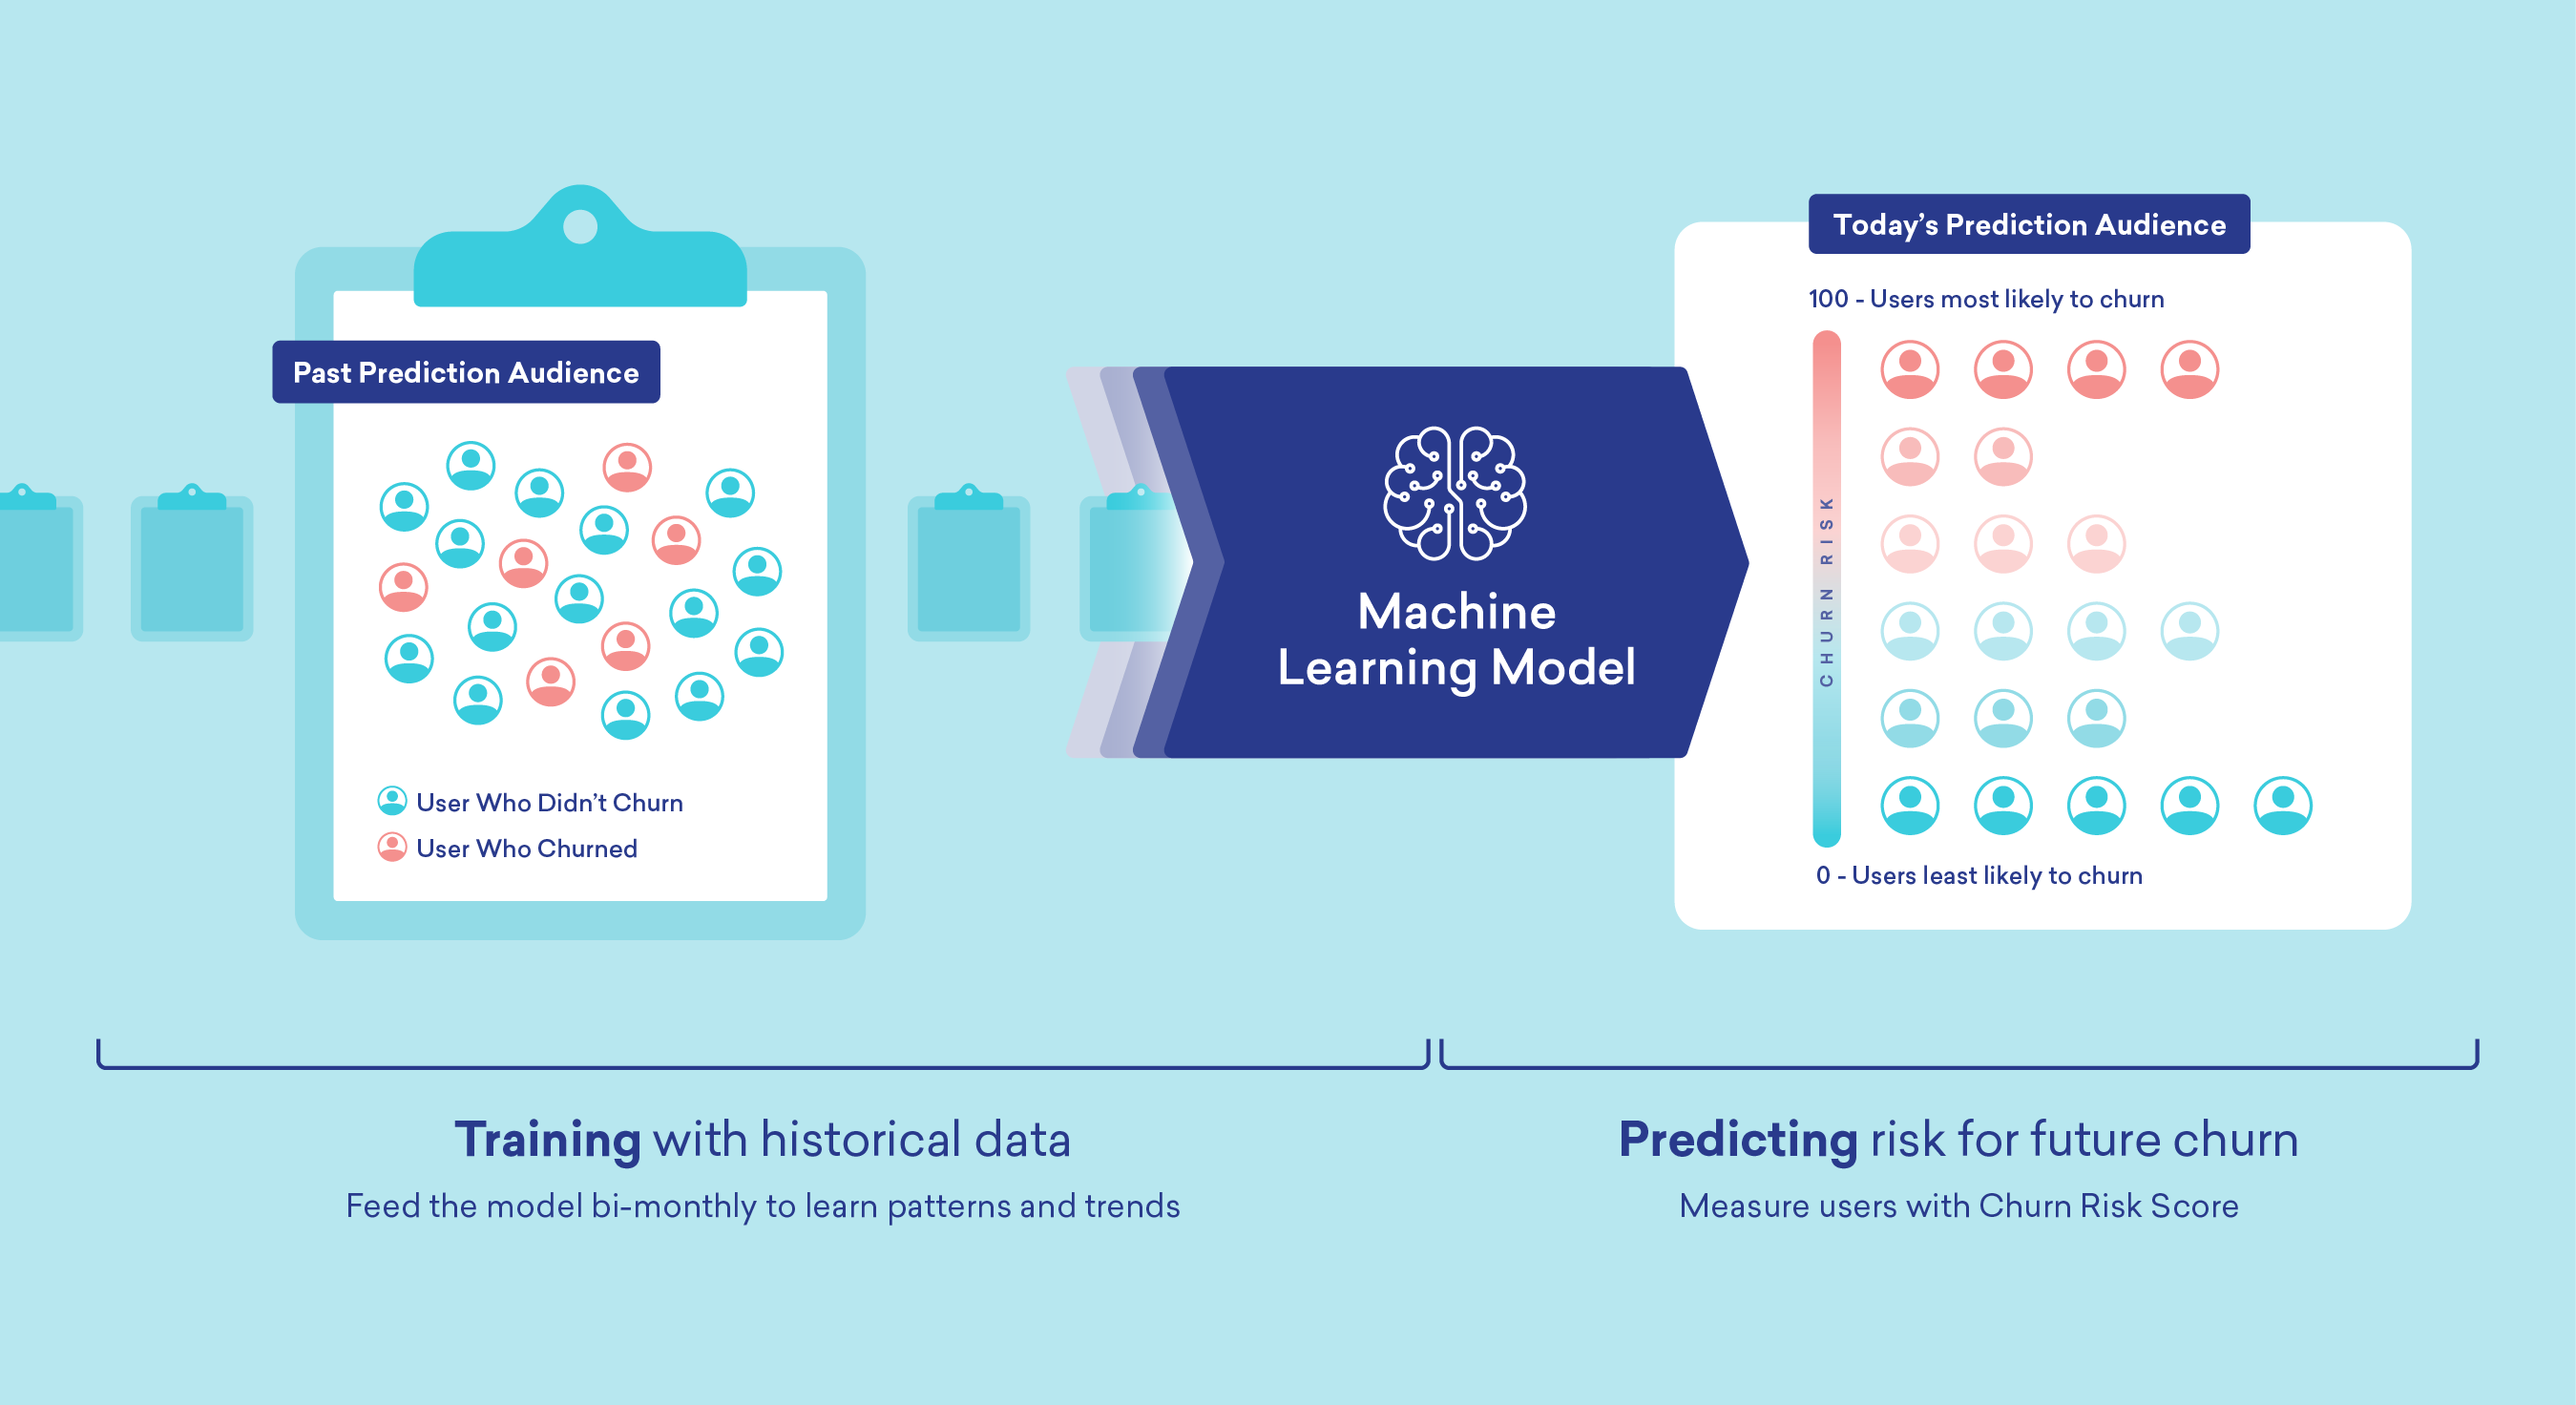 An overview of churn, which includes a past prediction audience with training with historical data. This contributes to predicting risk for future churn by measuring today's predicted audience with a churn risk score.